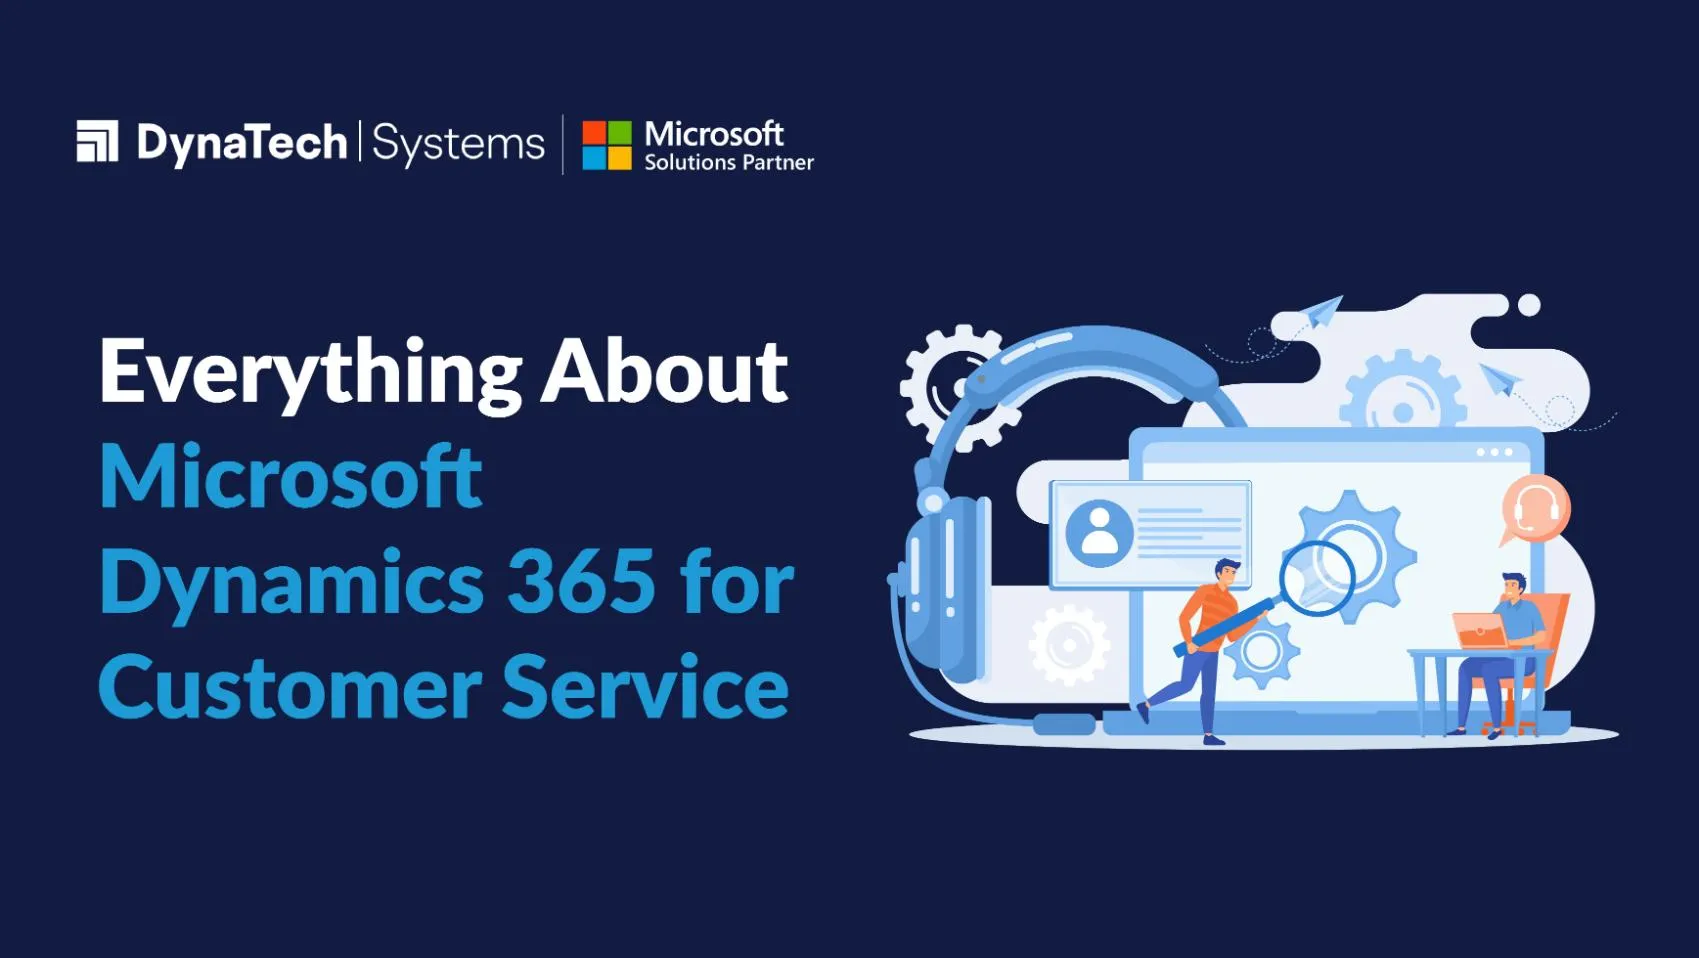 Everything About Microsoft Dynamics 365 for Customer Service